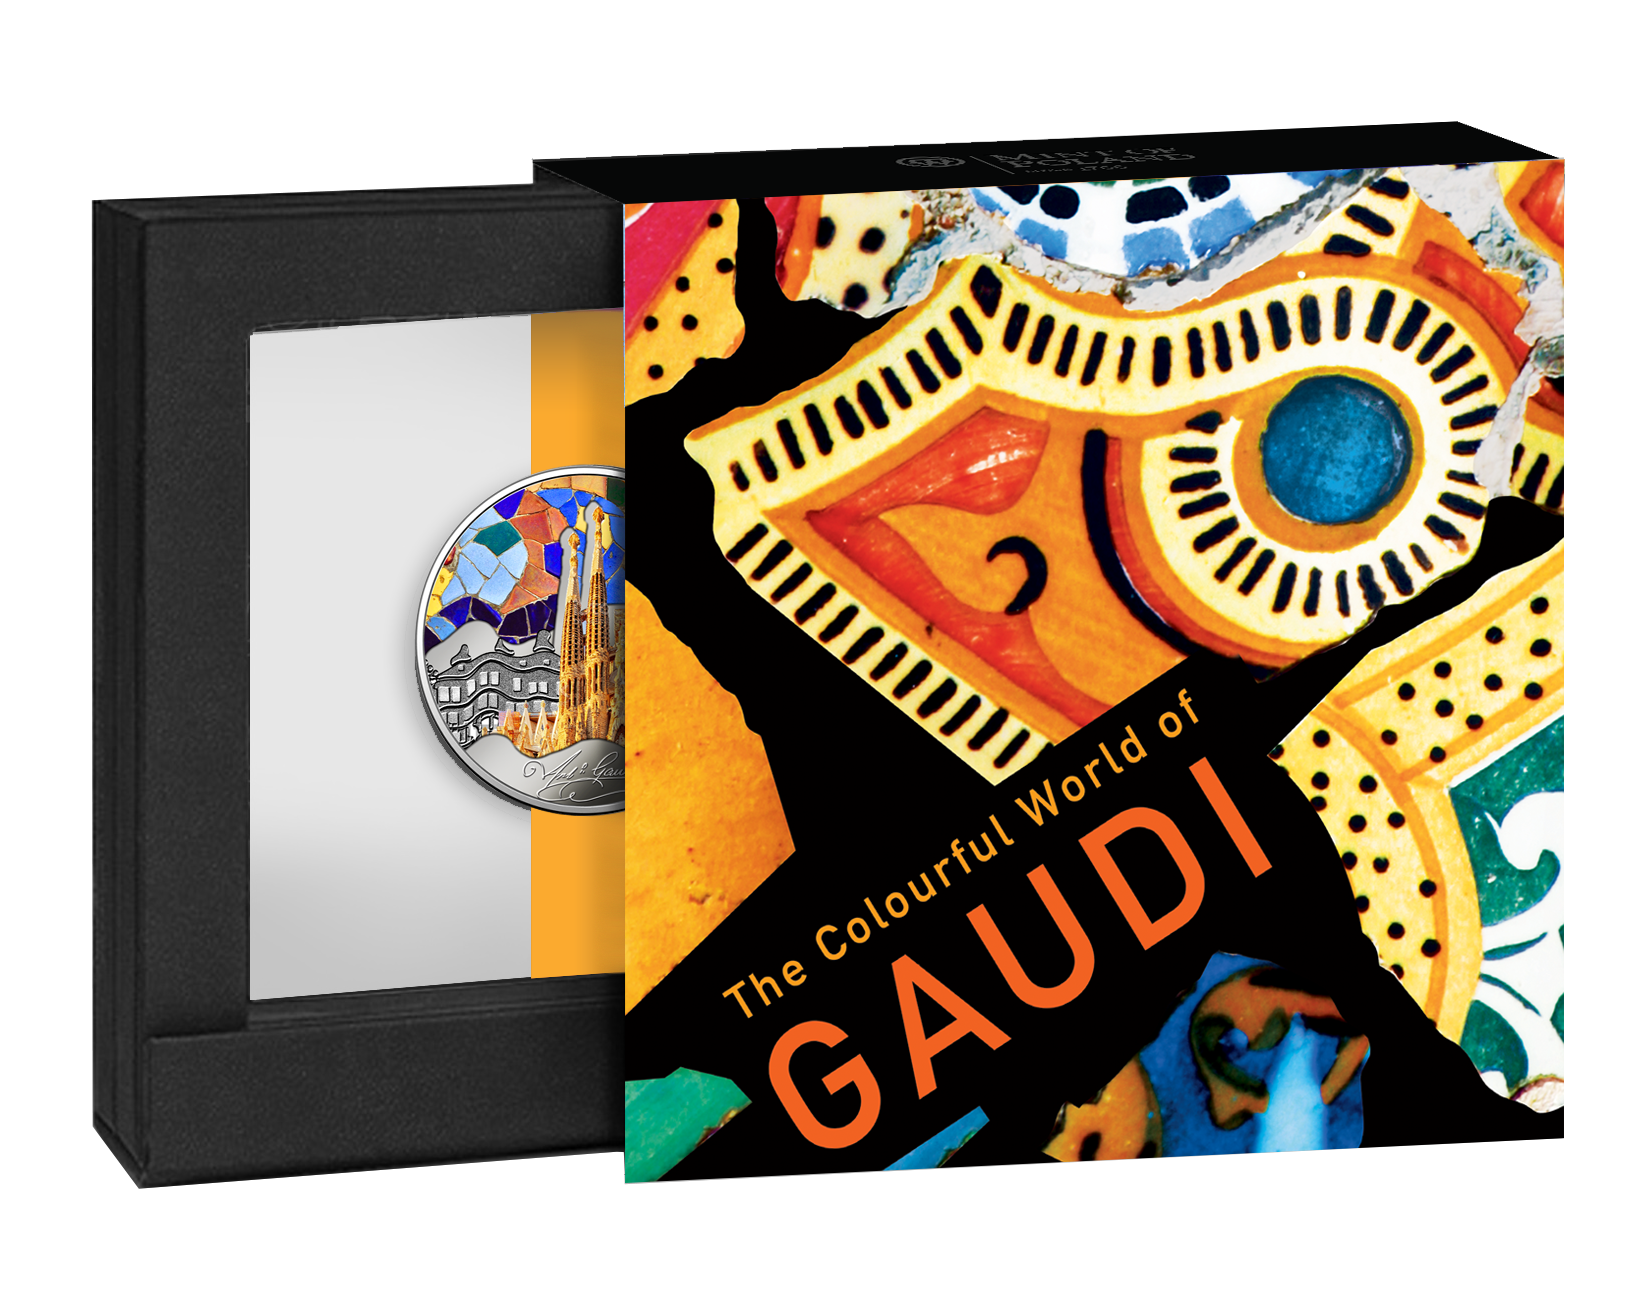 2023 Cameroon THE COLORFUL WORLD OF GAUDI 1 oz Silver Coin - OZB